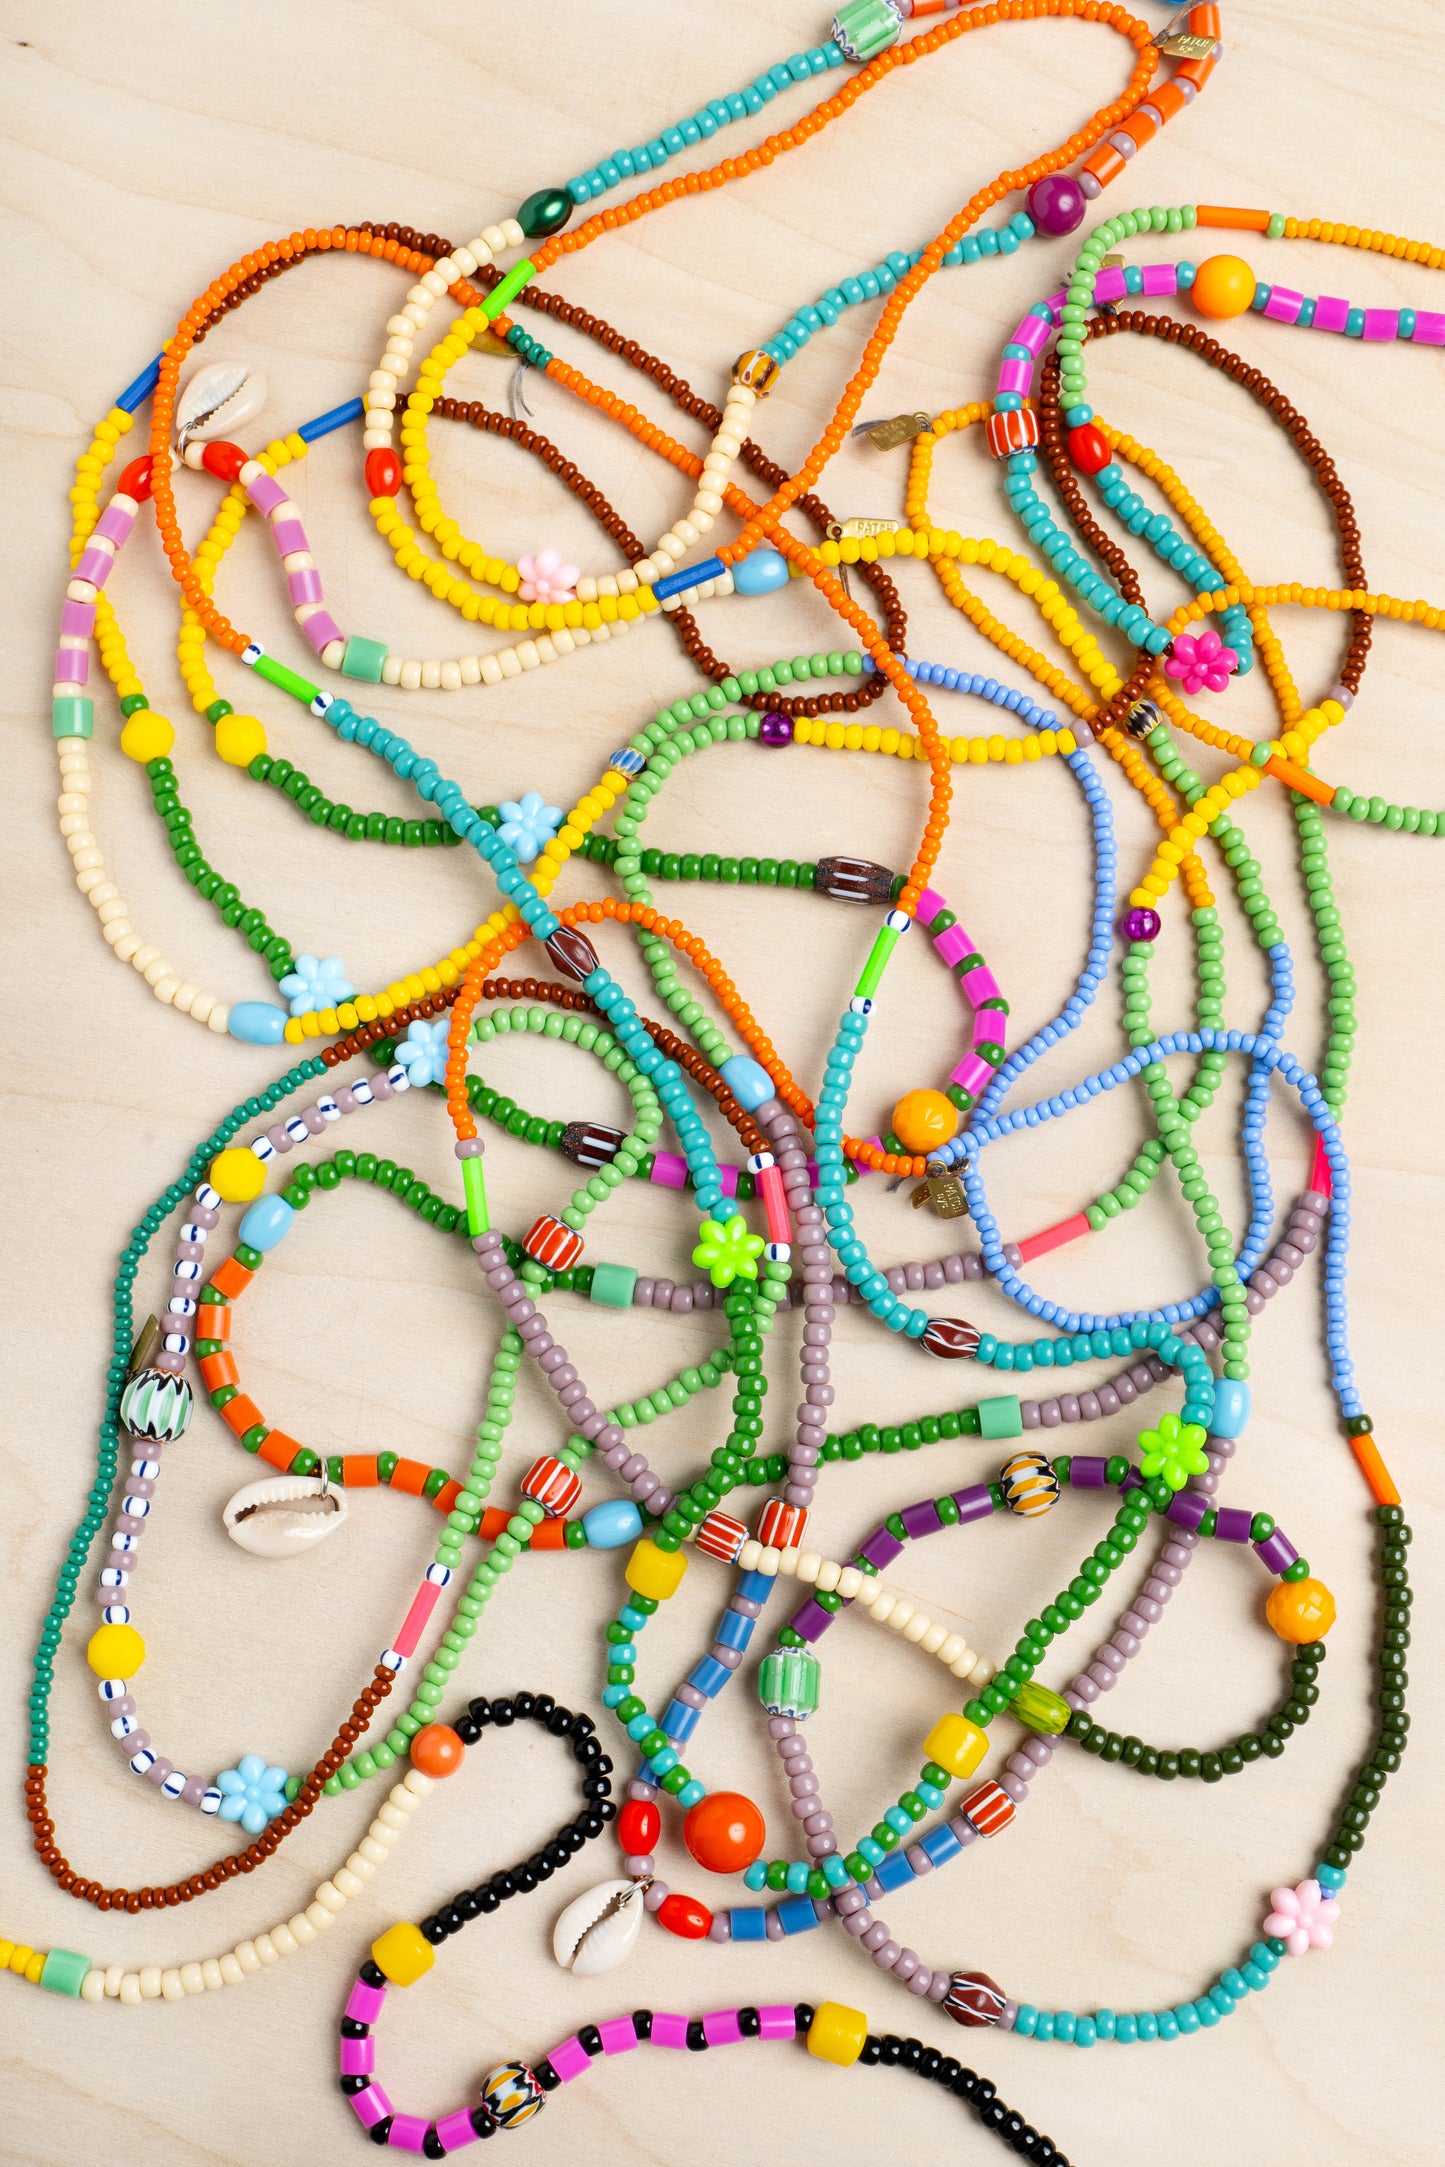 Mixed Beads Strand Necklace